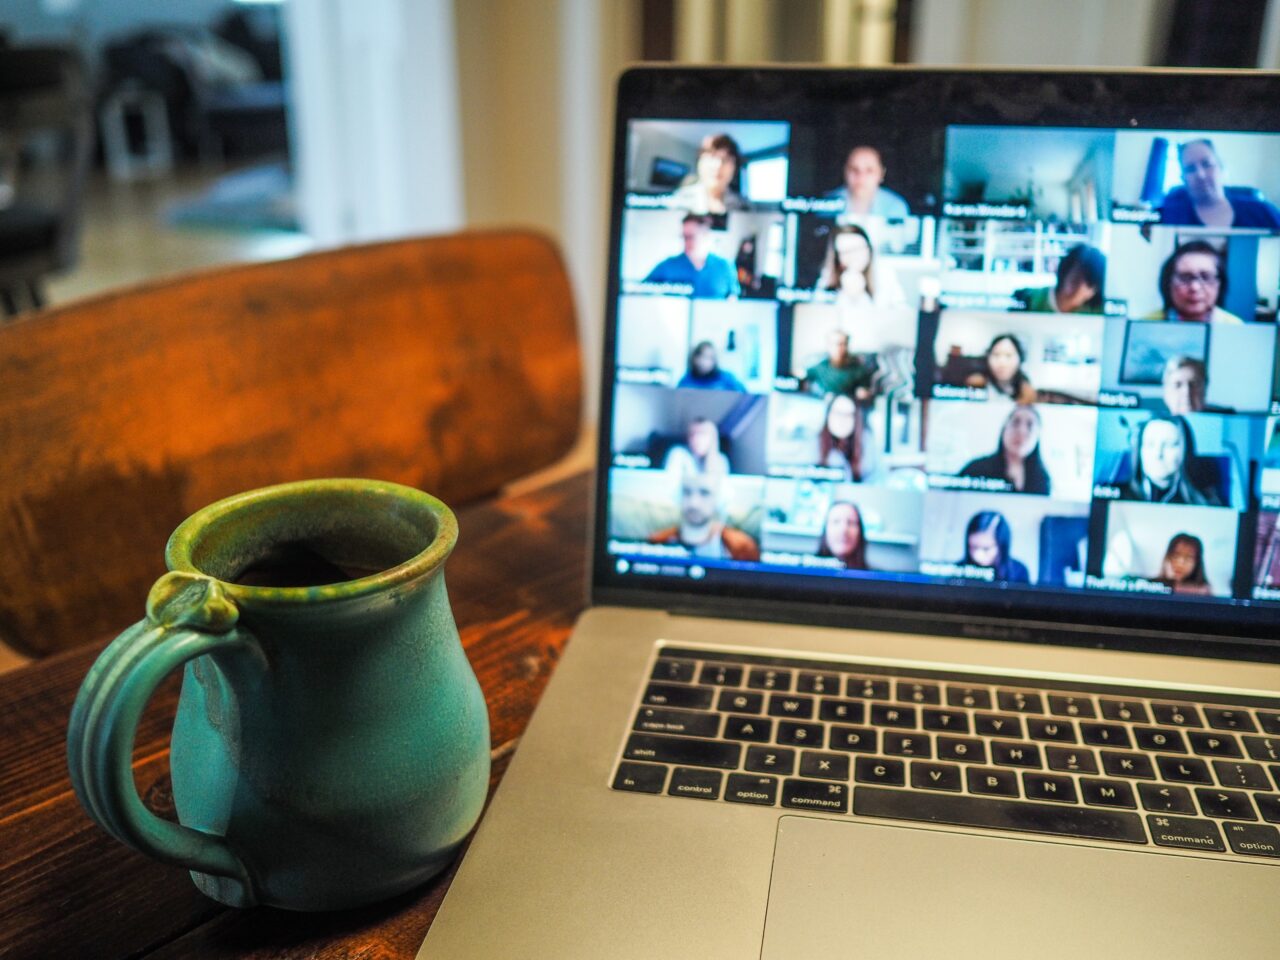 Videoconferencing: the new normal? (photo courtesy of Chris Montgomery on unsplash.com)